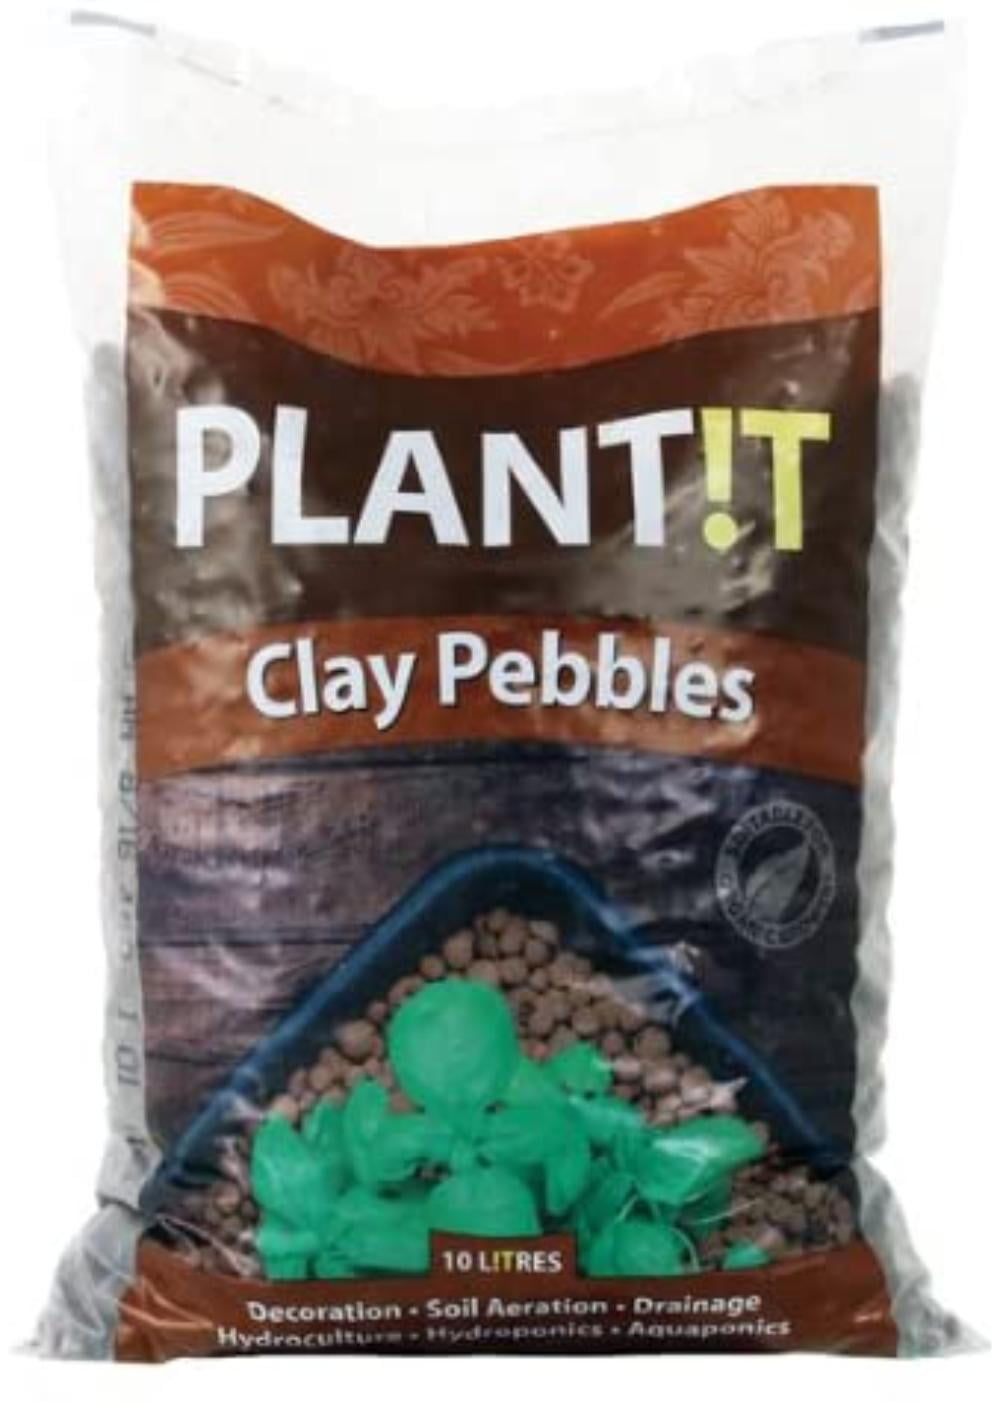 Expanded Clay Pebbles 1 liter for hydroponics hydro-culture and aquaponics 